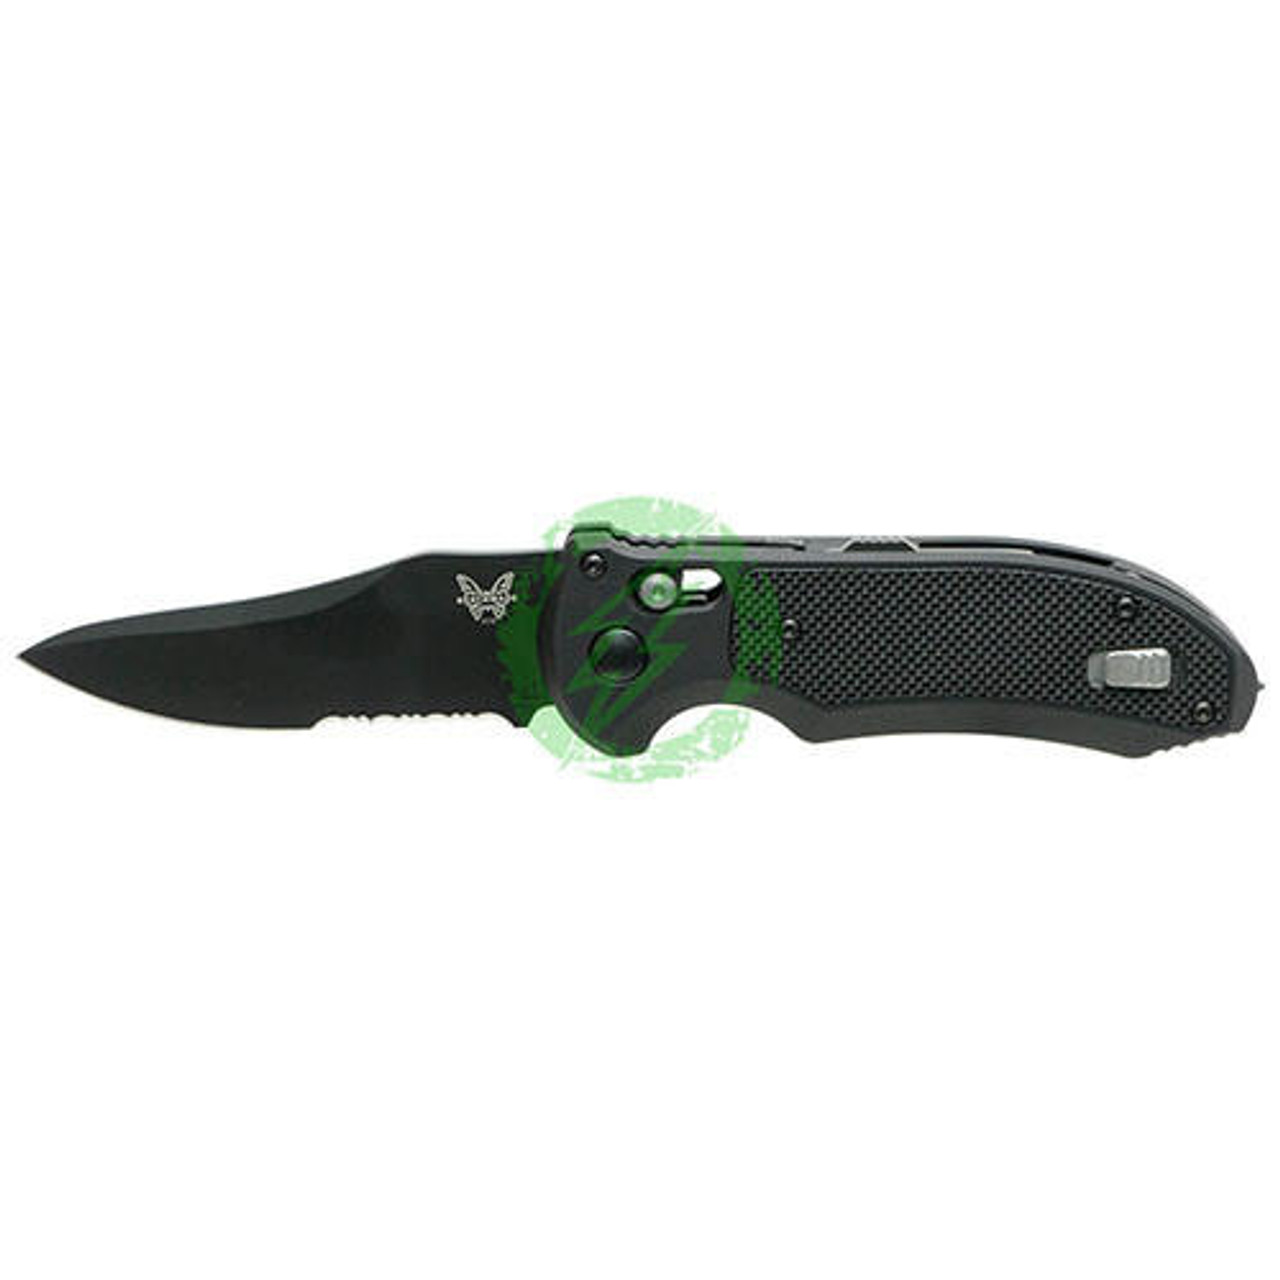  Benchmade Auto Tactical Triage Drop-Point Black Contoured G10 with Stainless Steel Liners Handle 